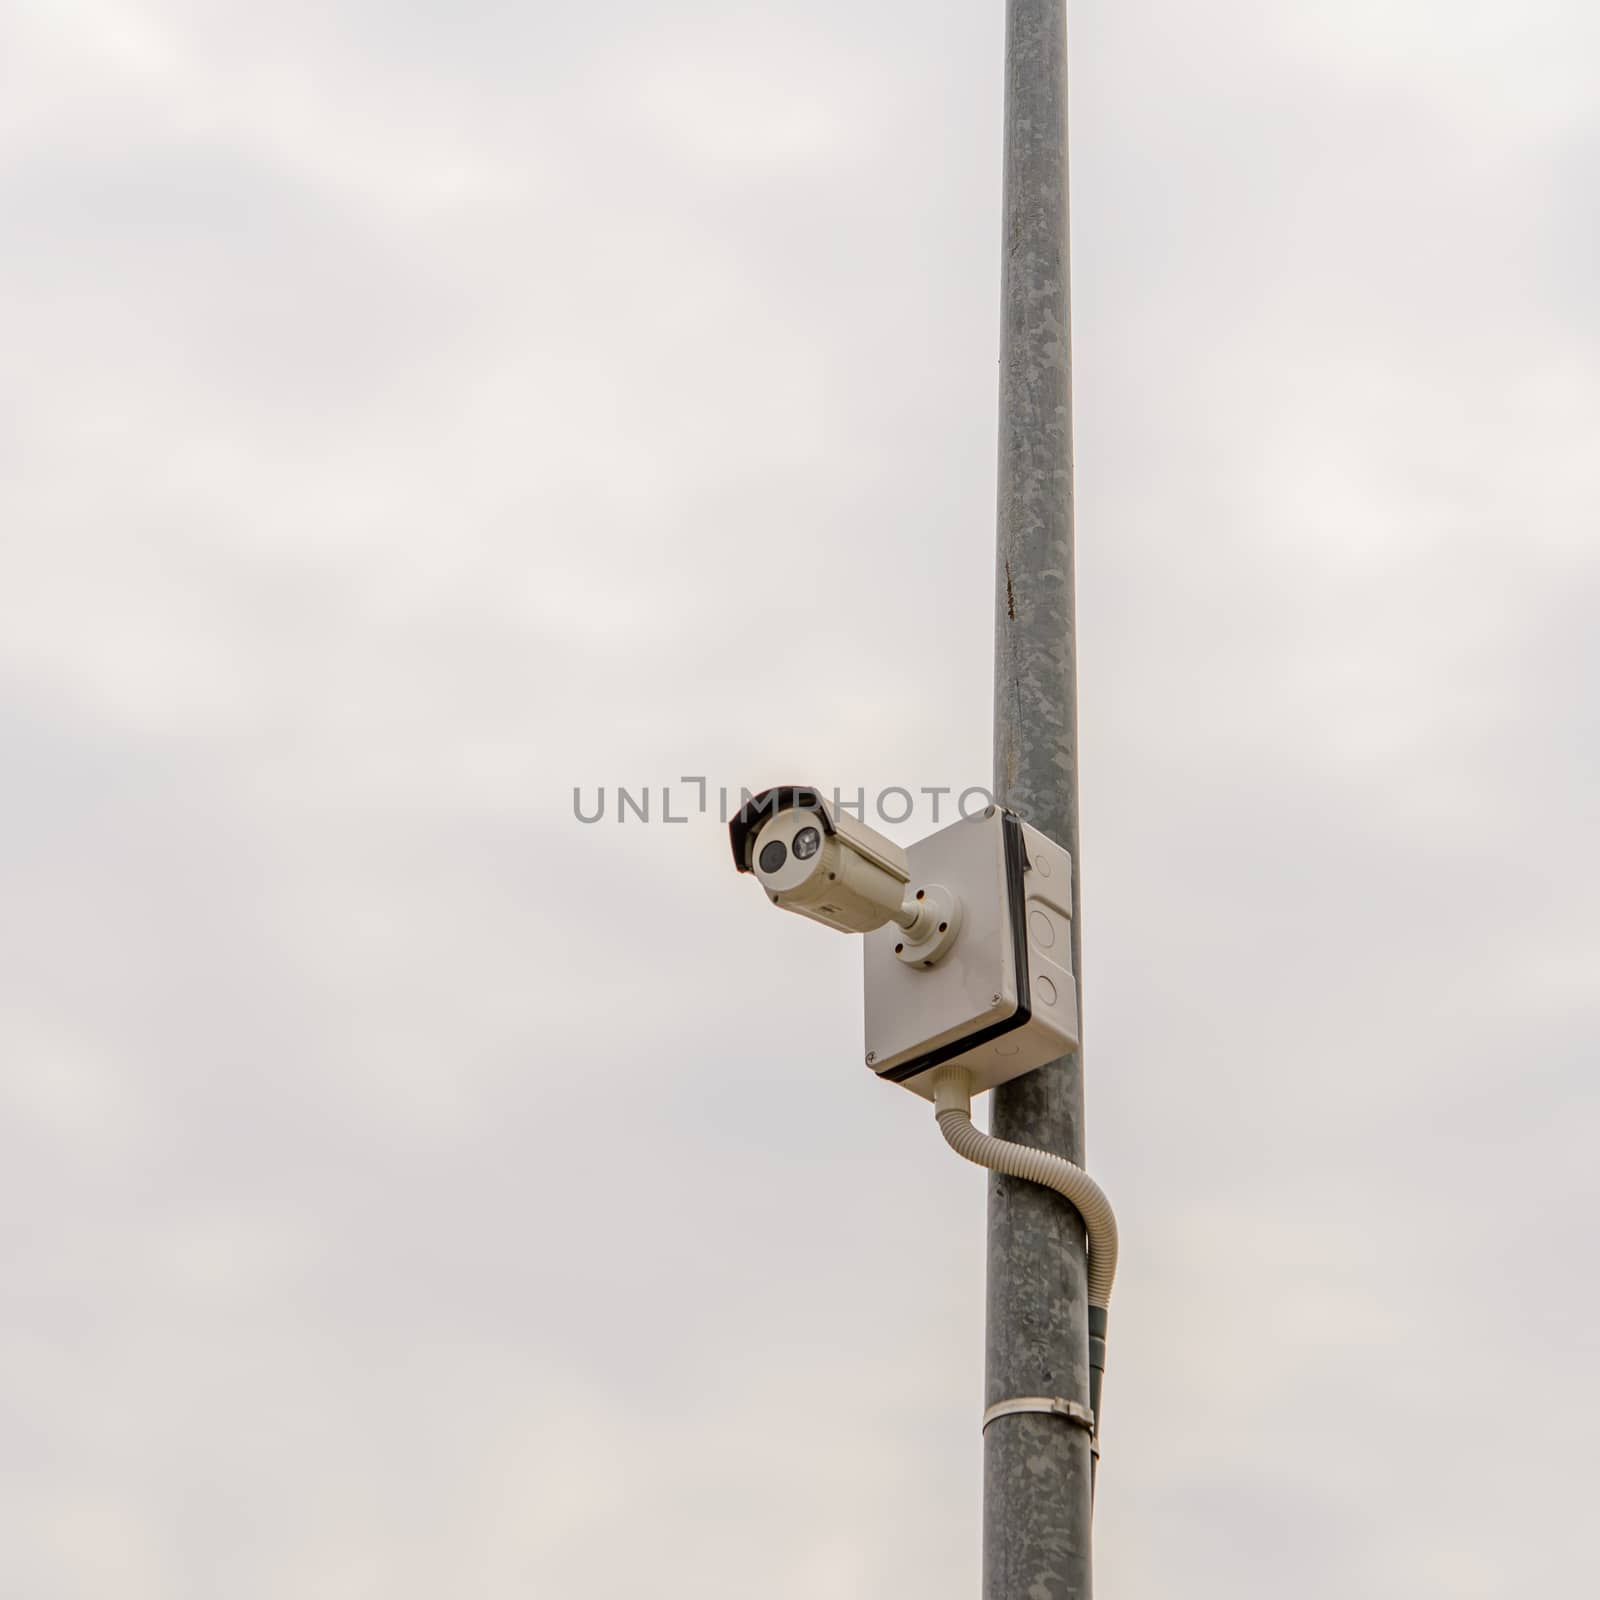 closed circuit camera for security surveillance. by toodlingstudio